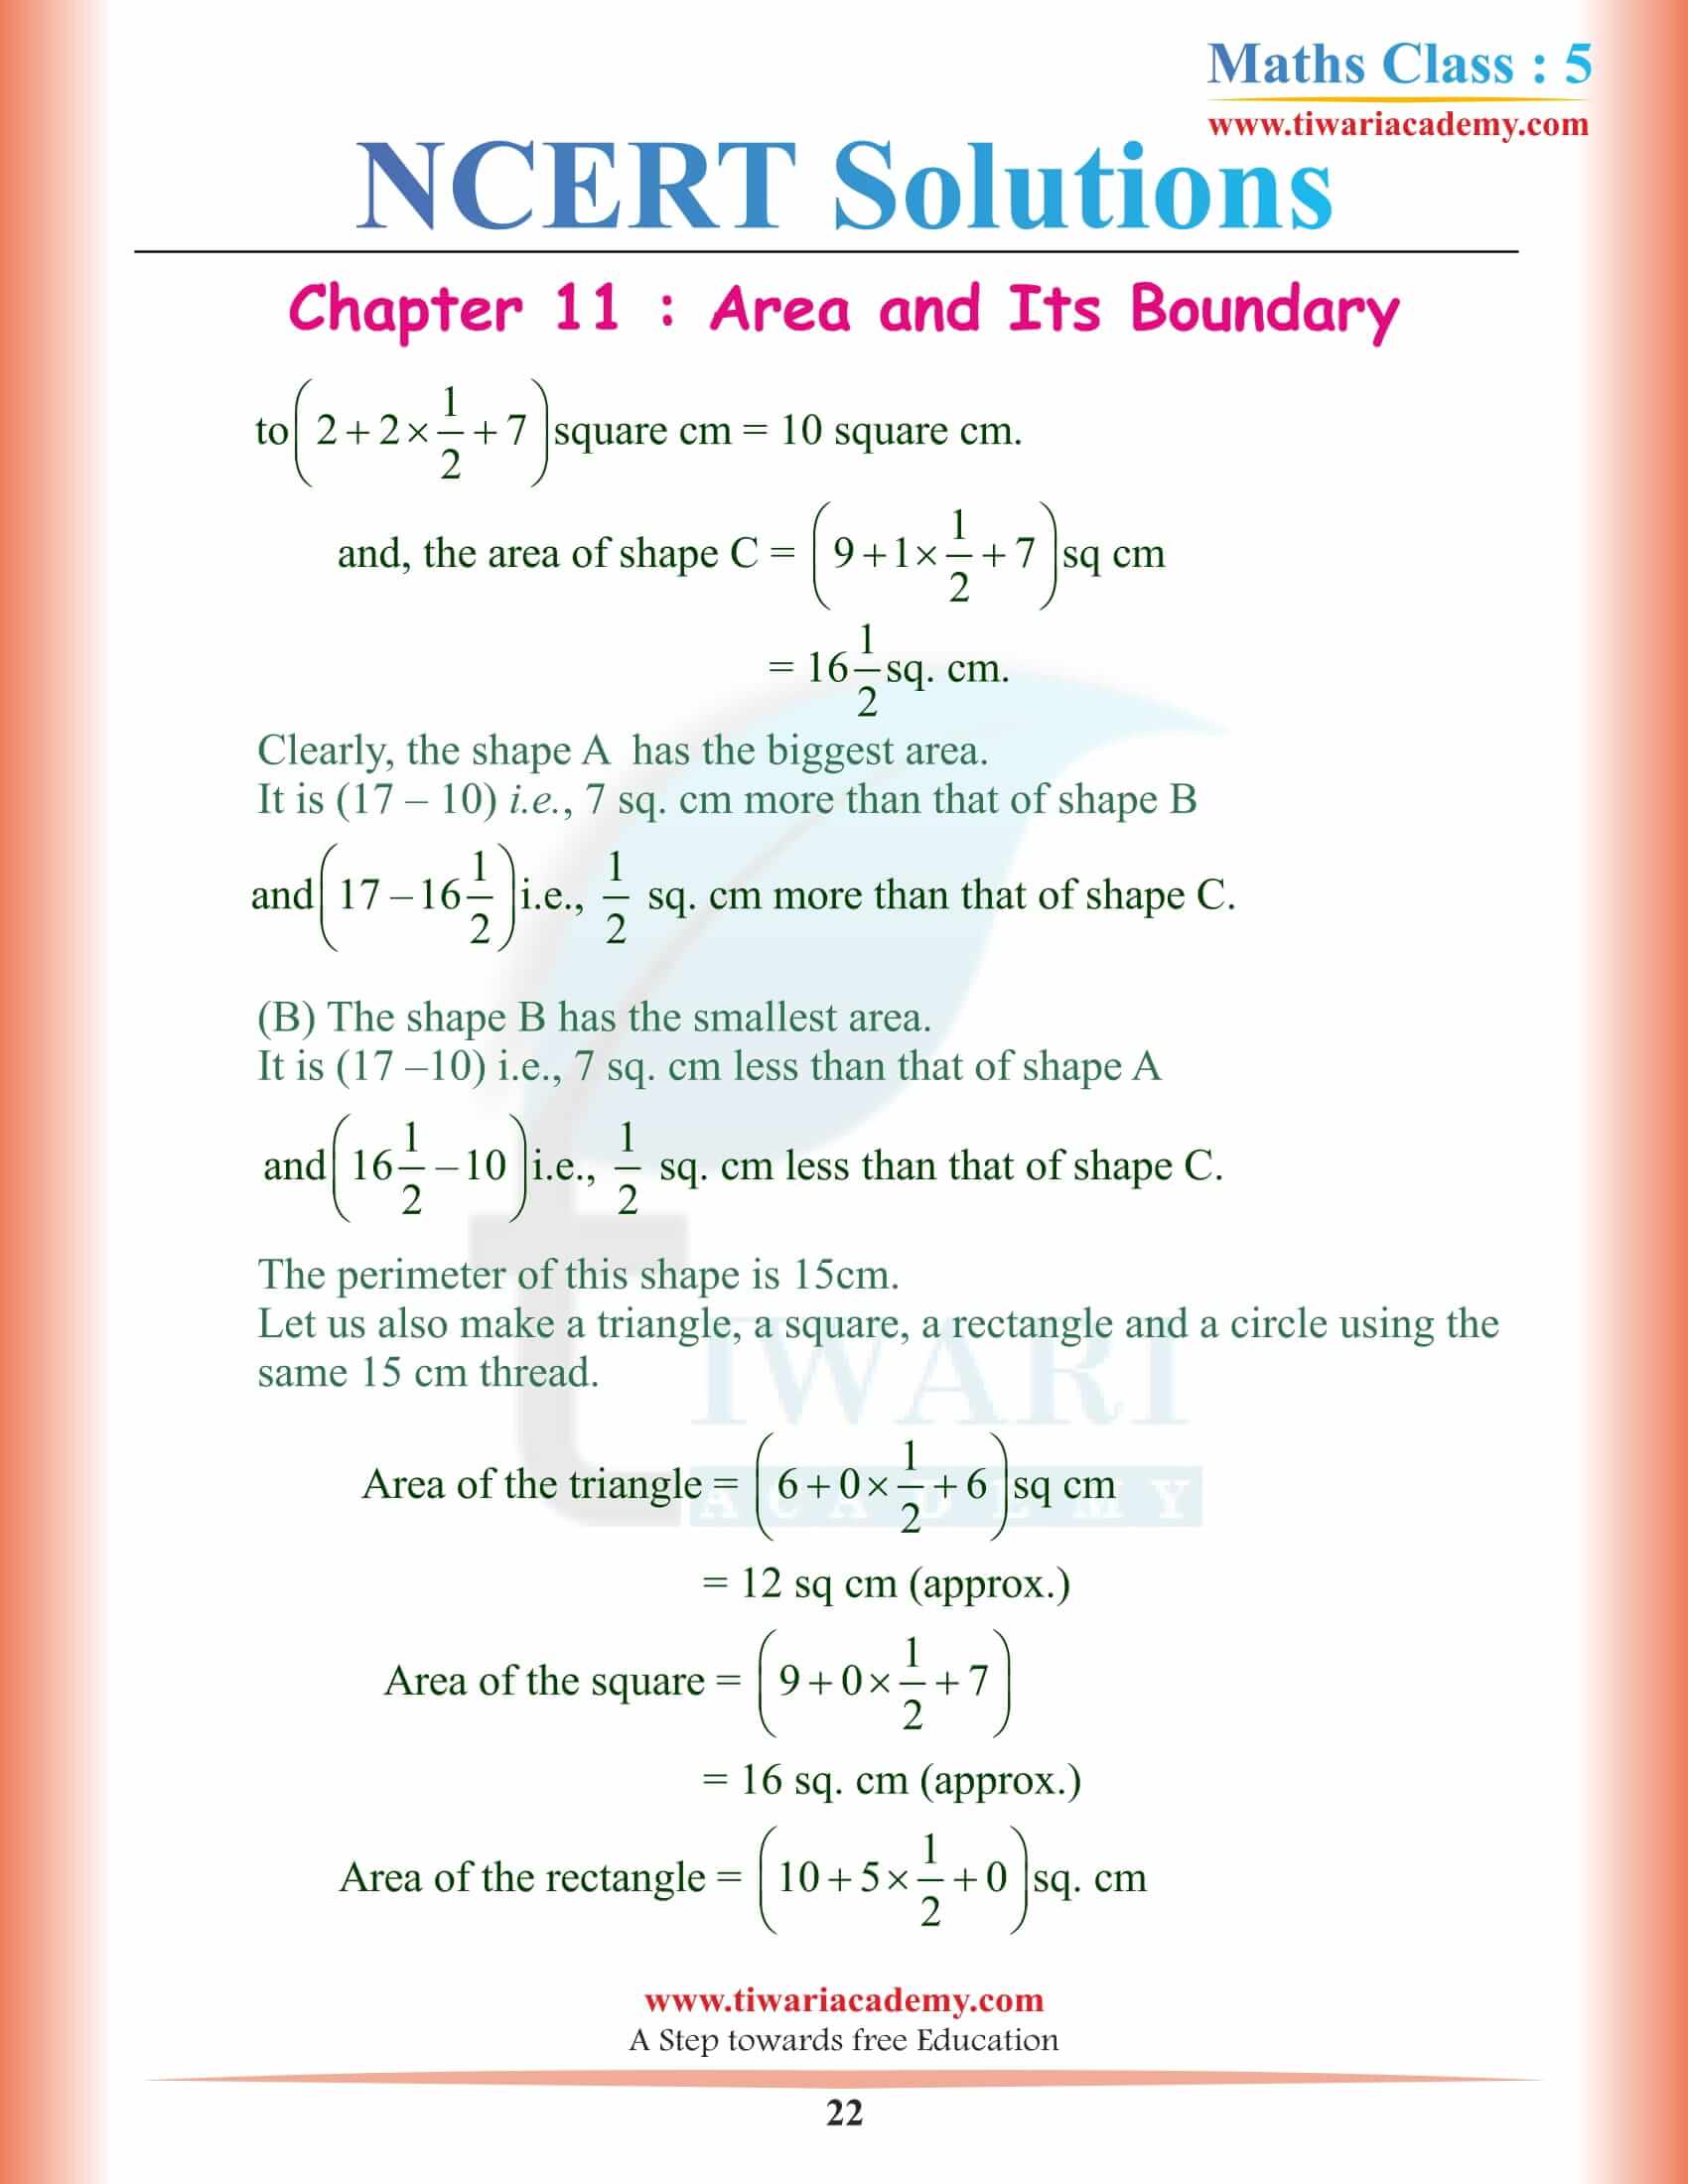 5th Math NCERT Chapter 11 Solutions in PDF